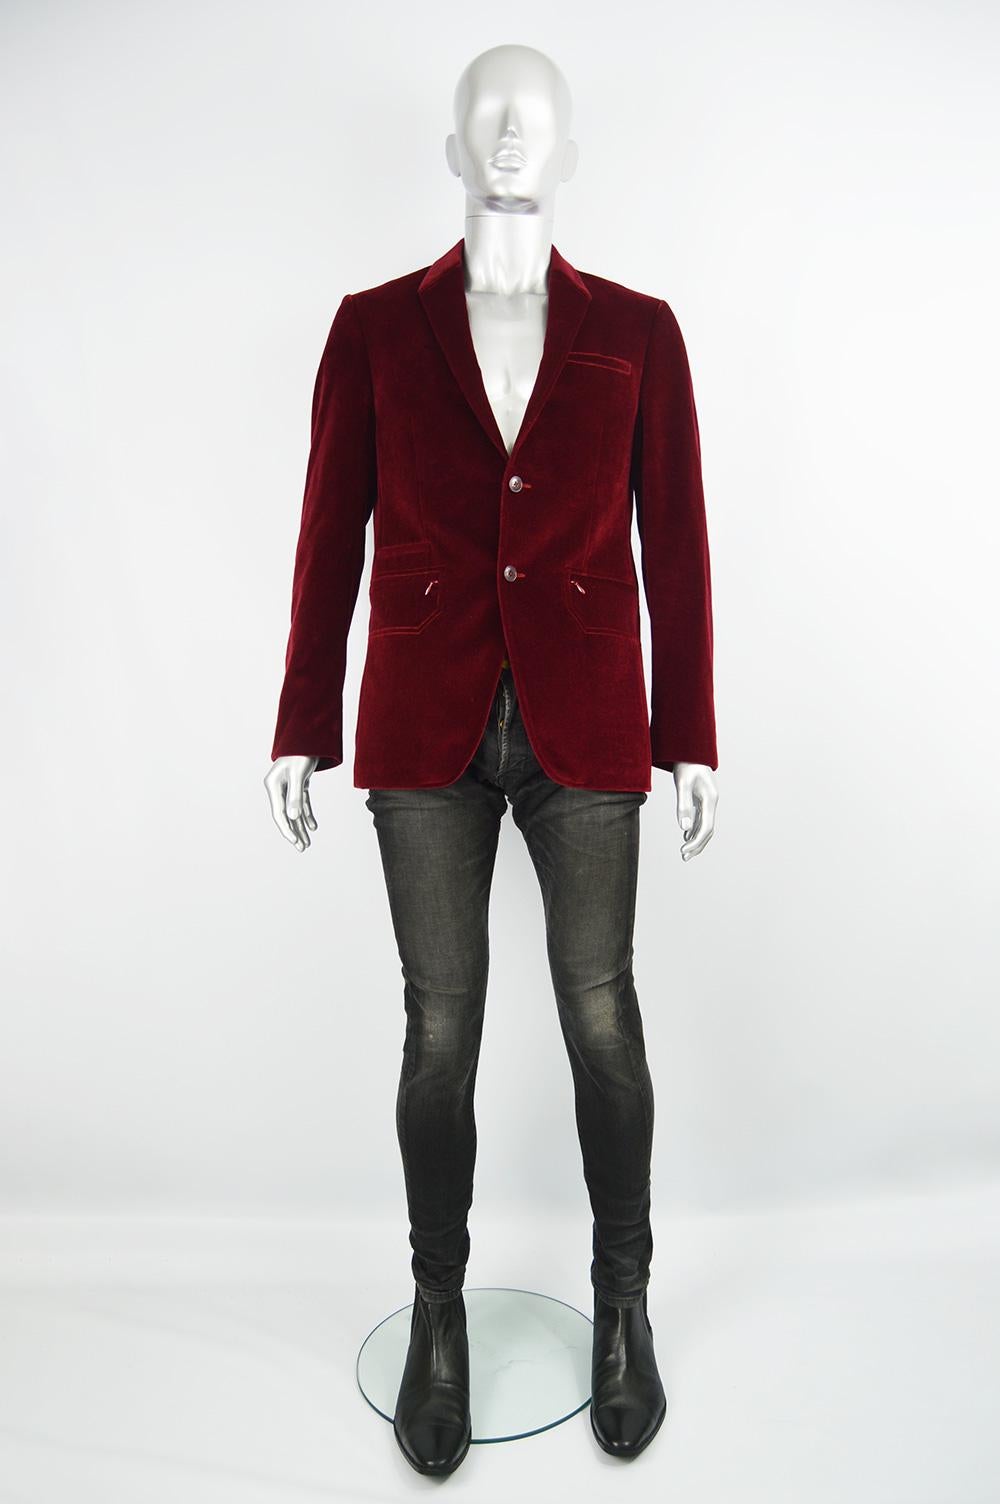 A stylish vintage Thierry Mugler jacket from the 90s in a deep red velvet with geometric shaped zip pockets, single breasted buttons and unique lapels. 

Size: Marked IT 50 which is roughly a men's Medium to Large. Please check measurements. 
Chest